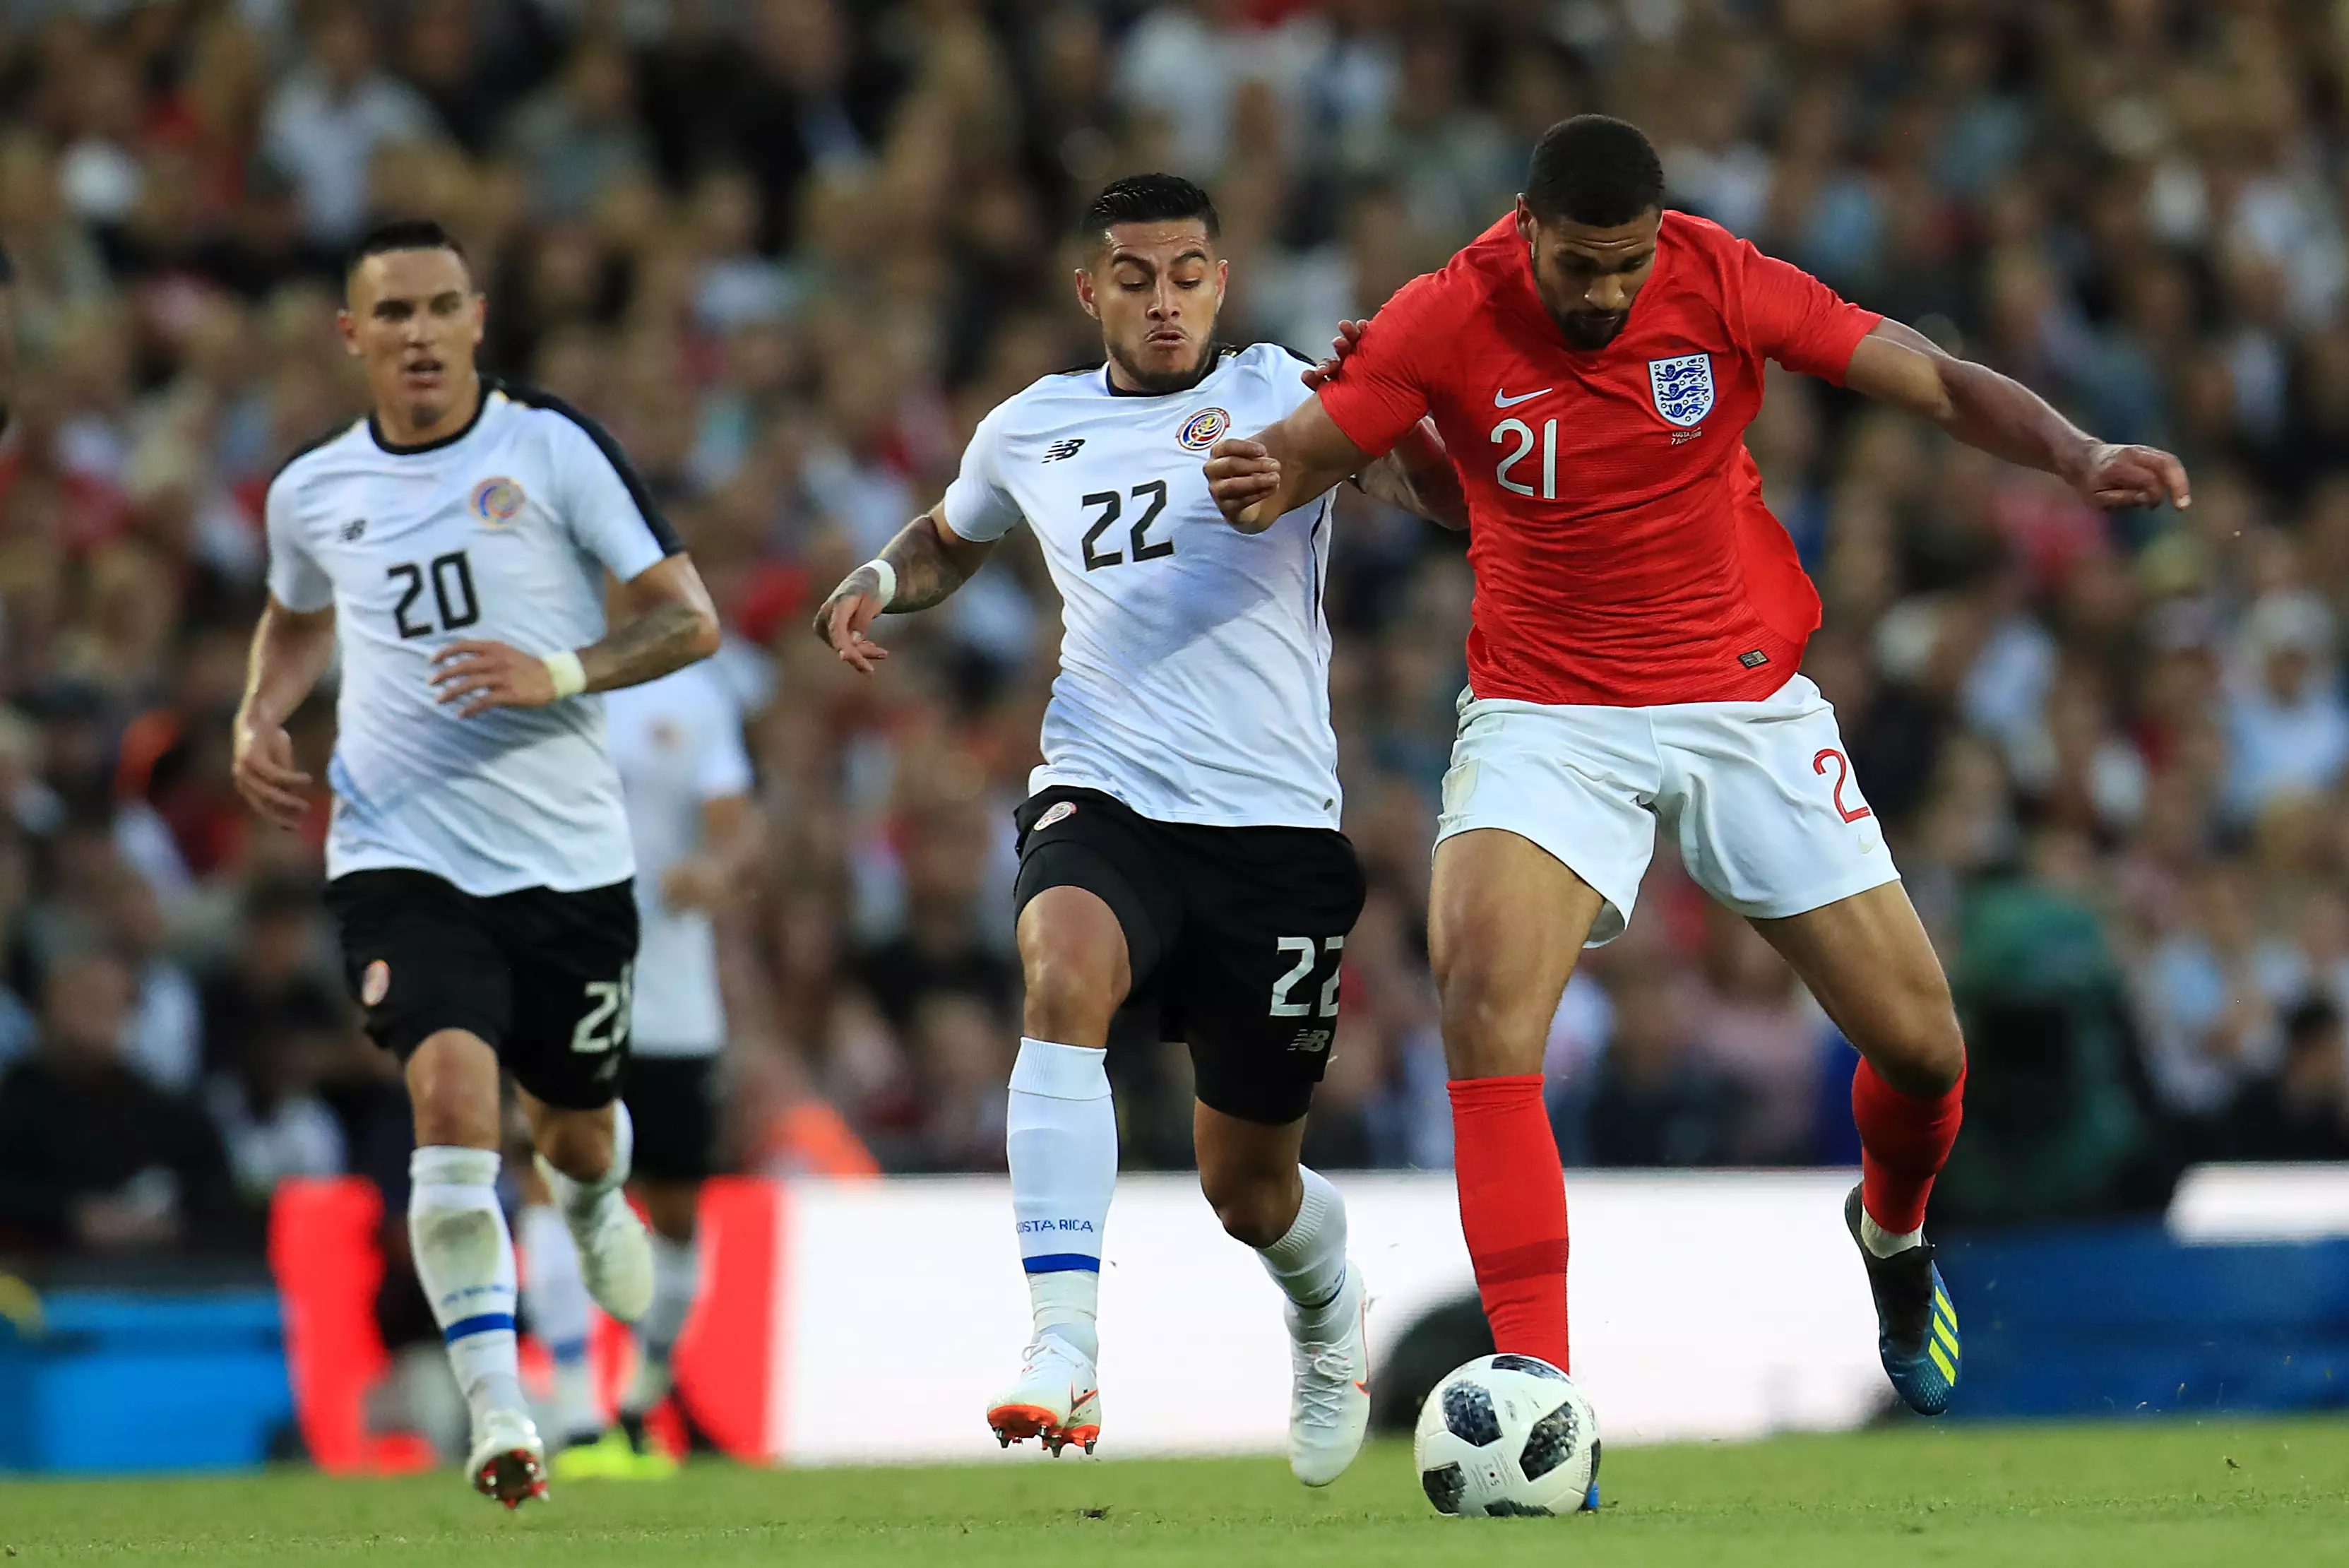 Loftus-Cheek in action for England. Image: PA